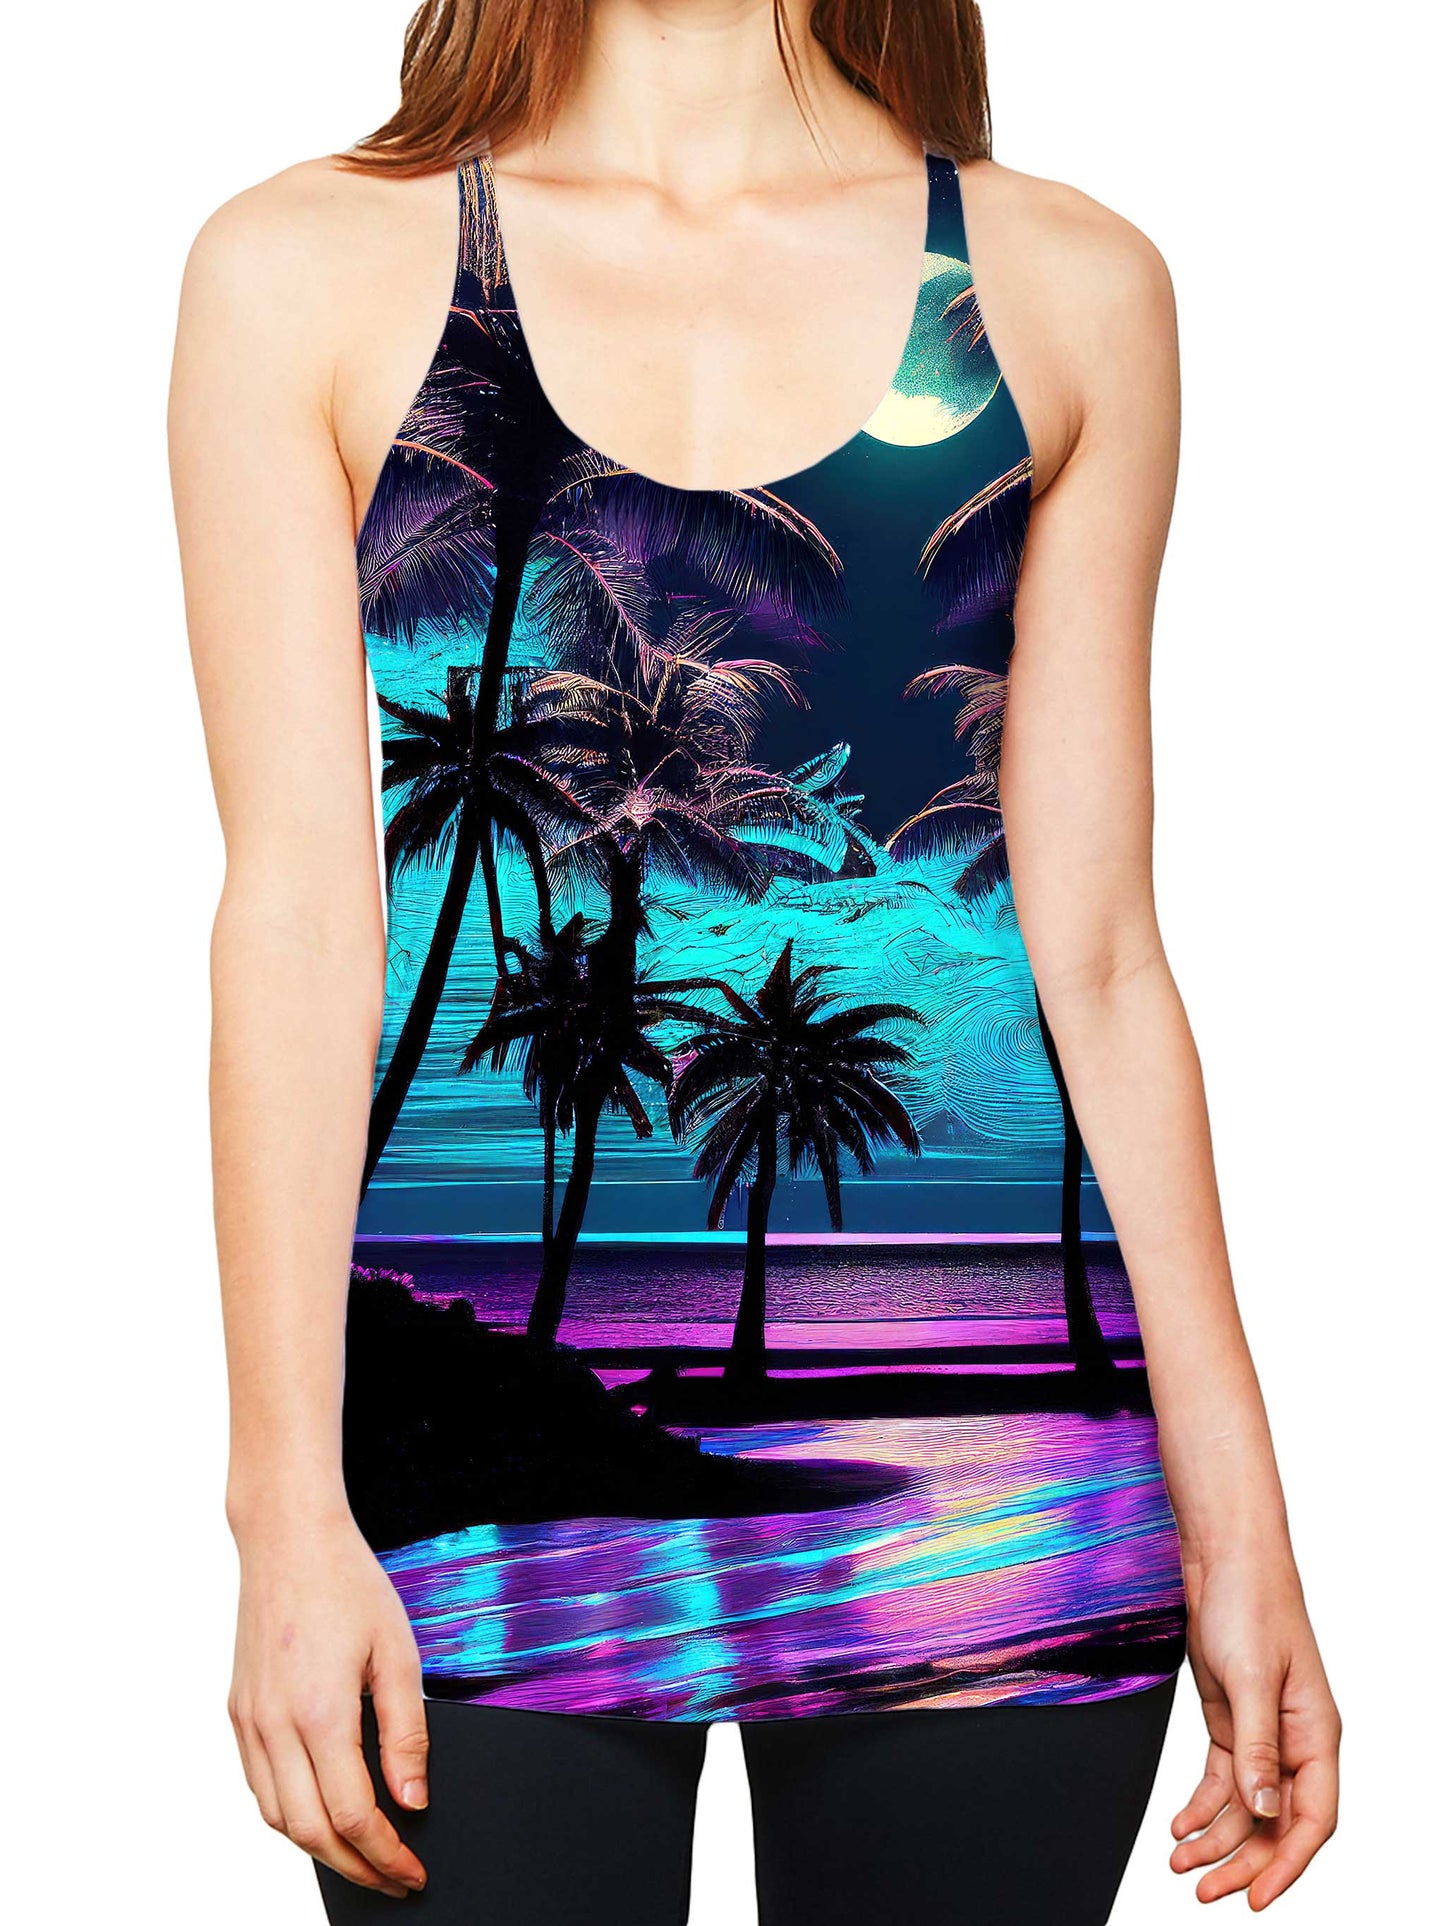 Spellbound Women's Tank and Leggings Combo, iEDM, | iEDM